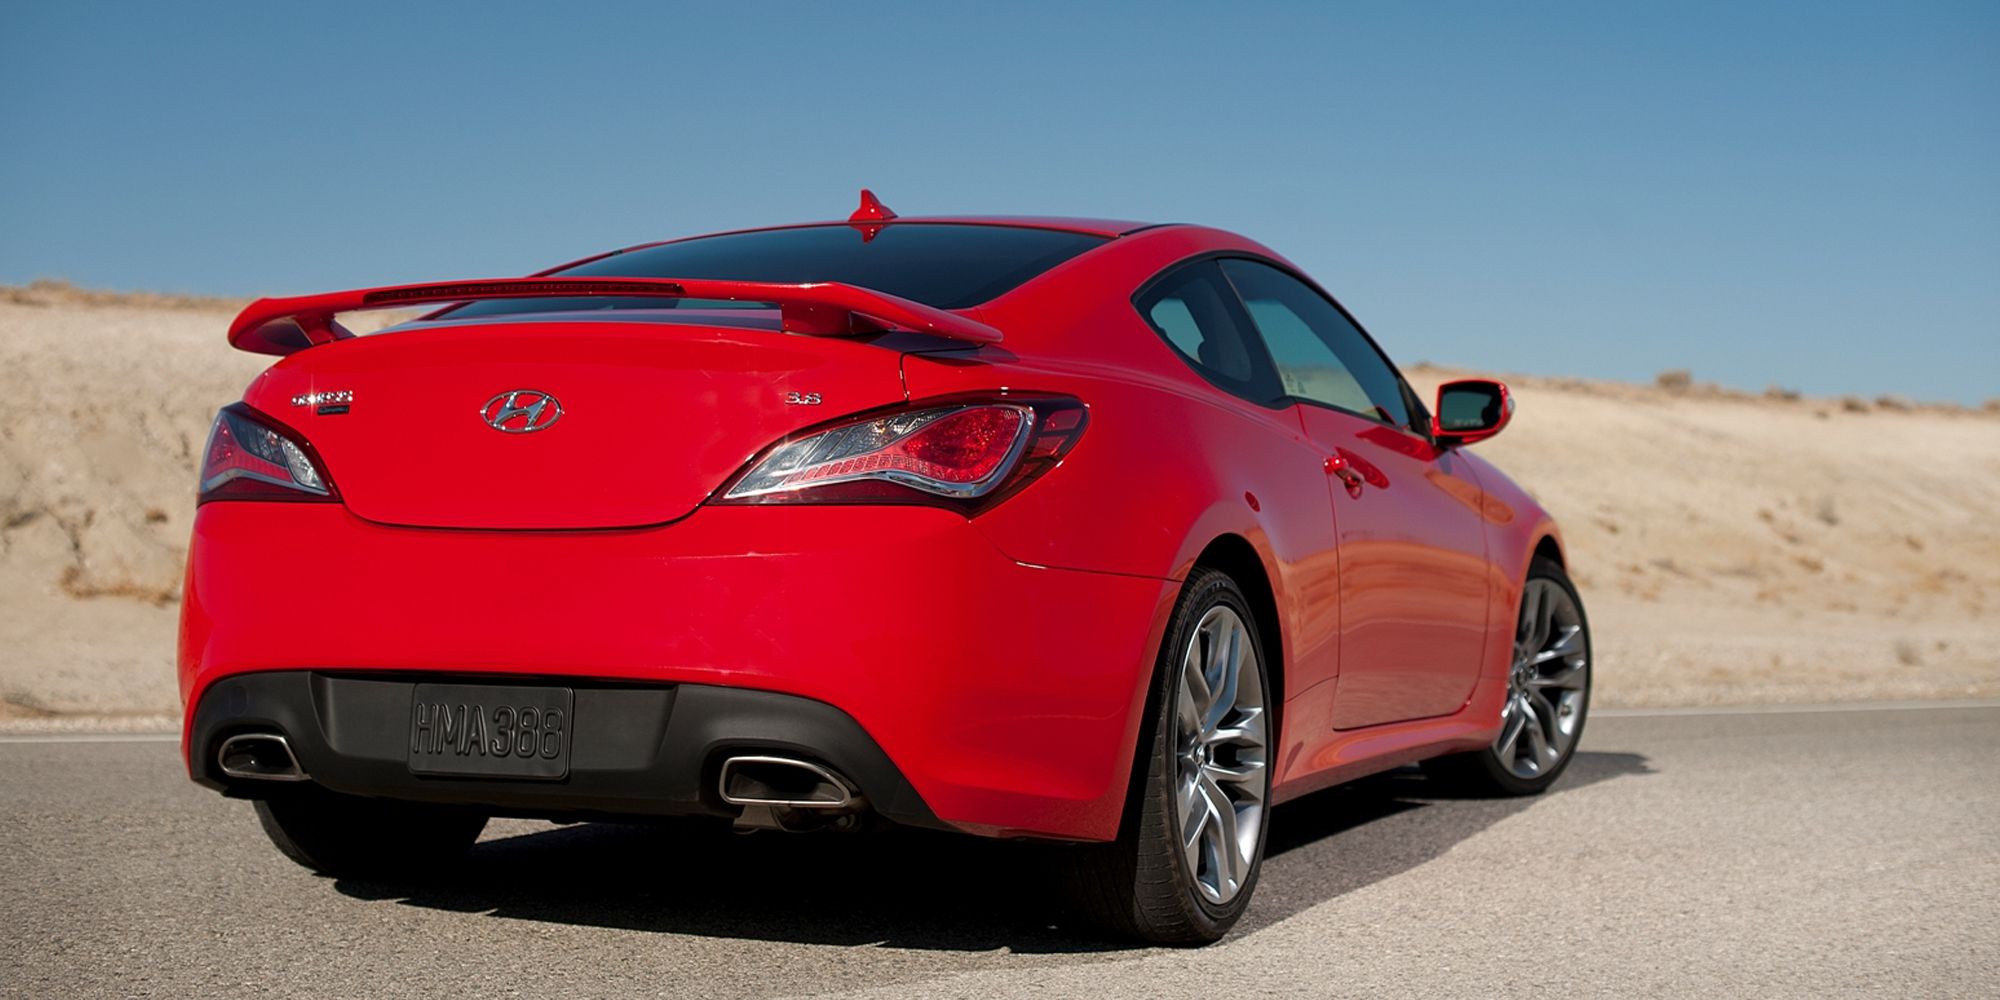 The rear of the Genesis Coupe